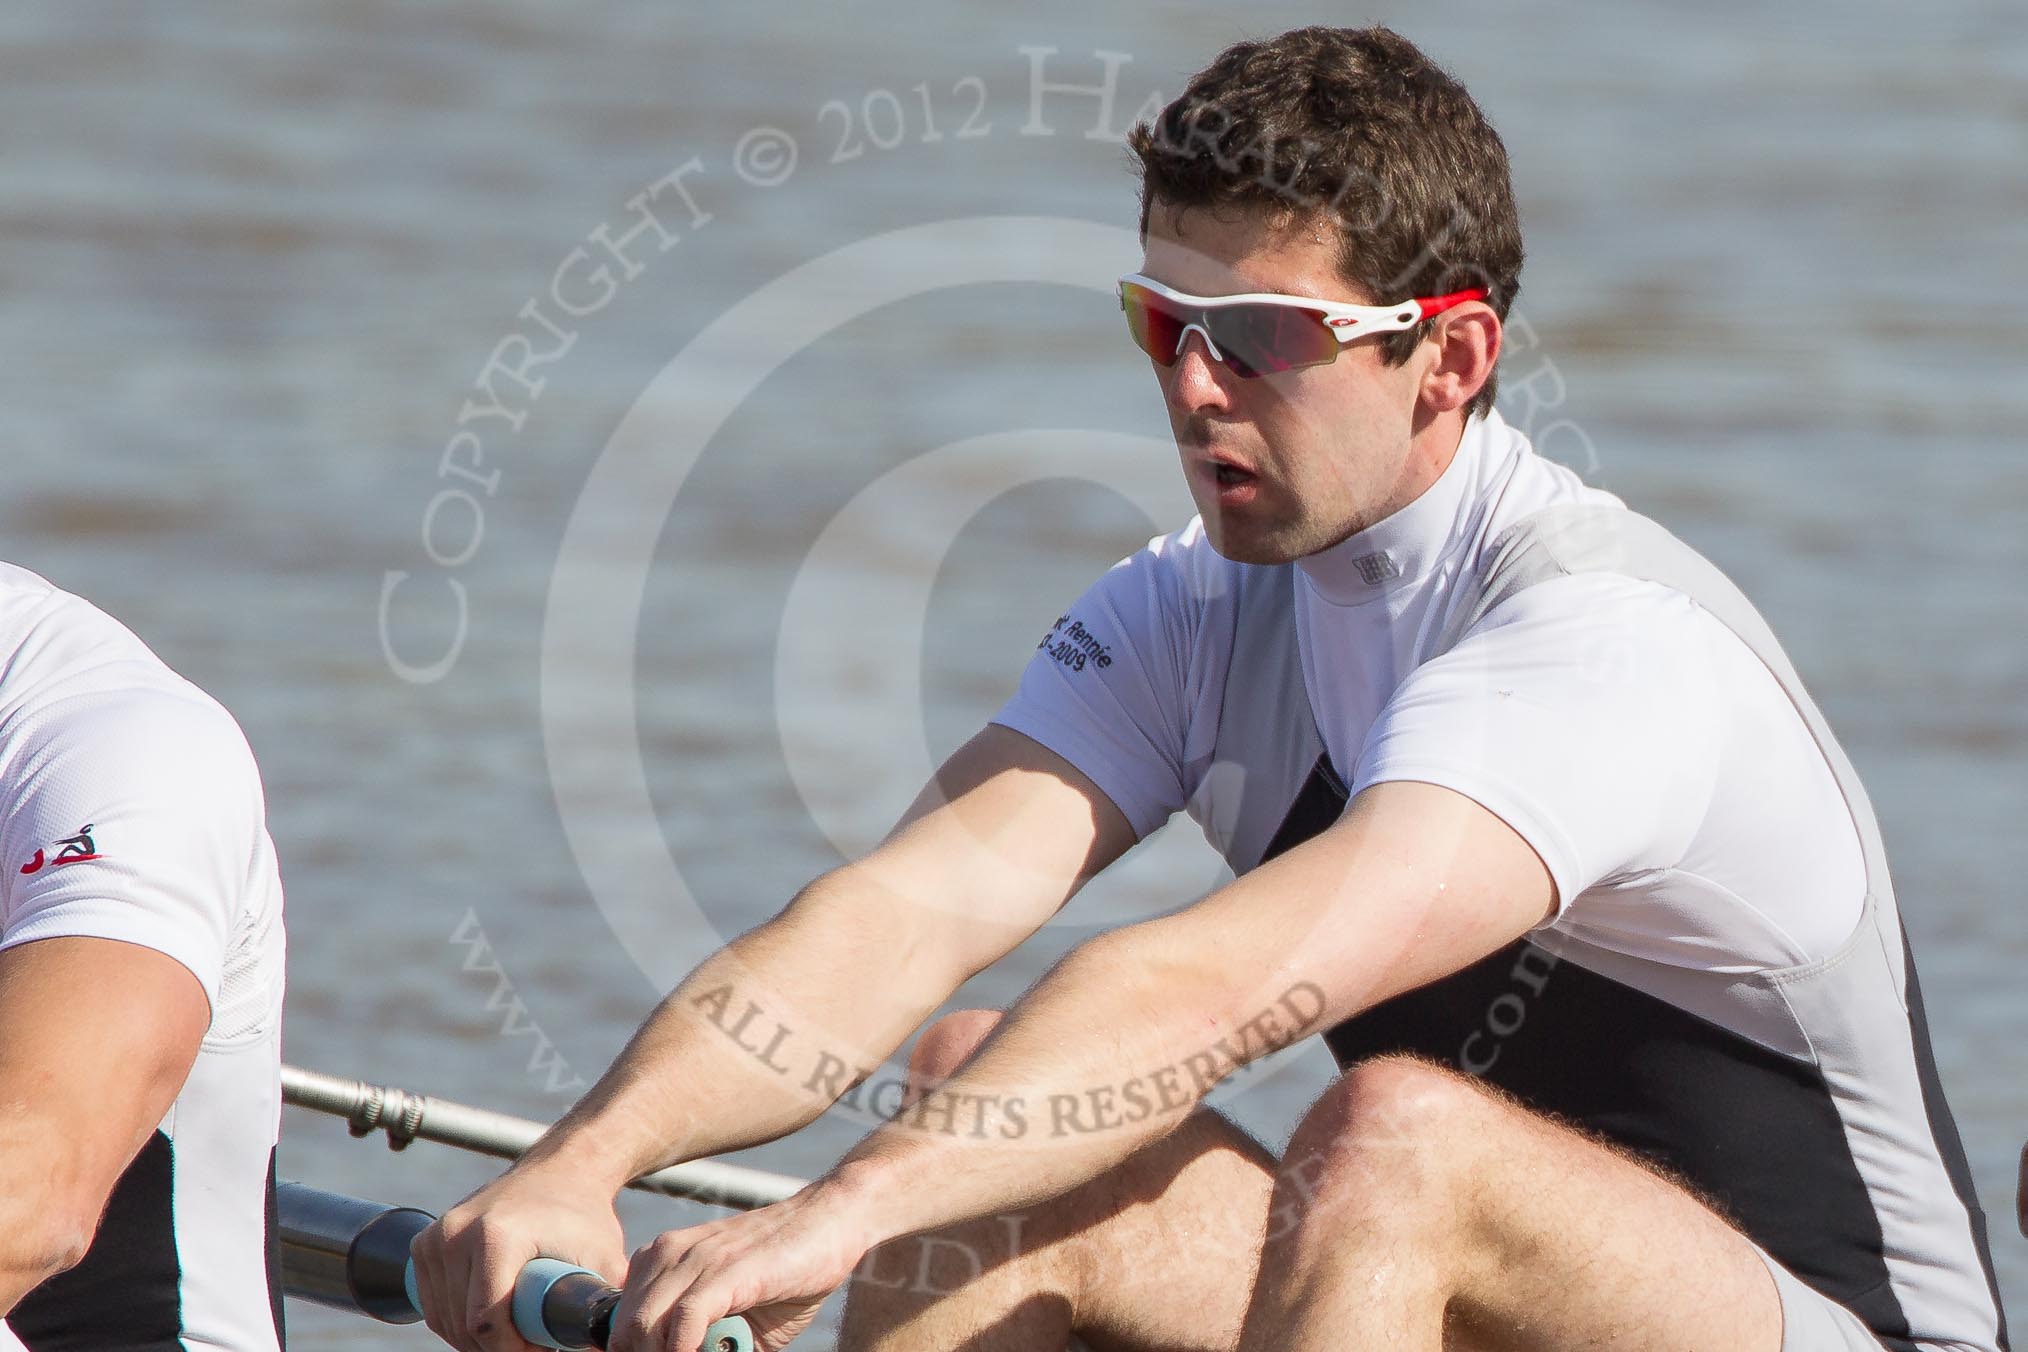 The Boat Race season 2012 - fixture CUBC vs Molesey BC.




on 25 March 2012 at 15:02, image #85